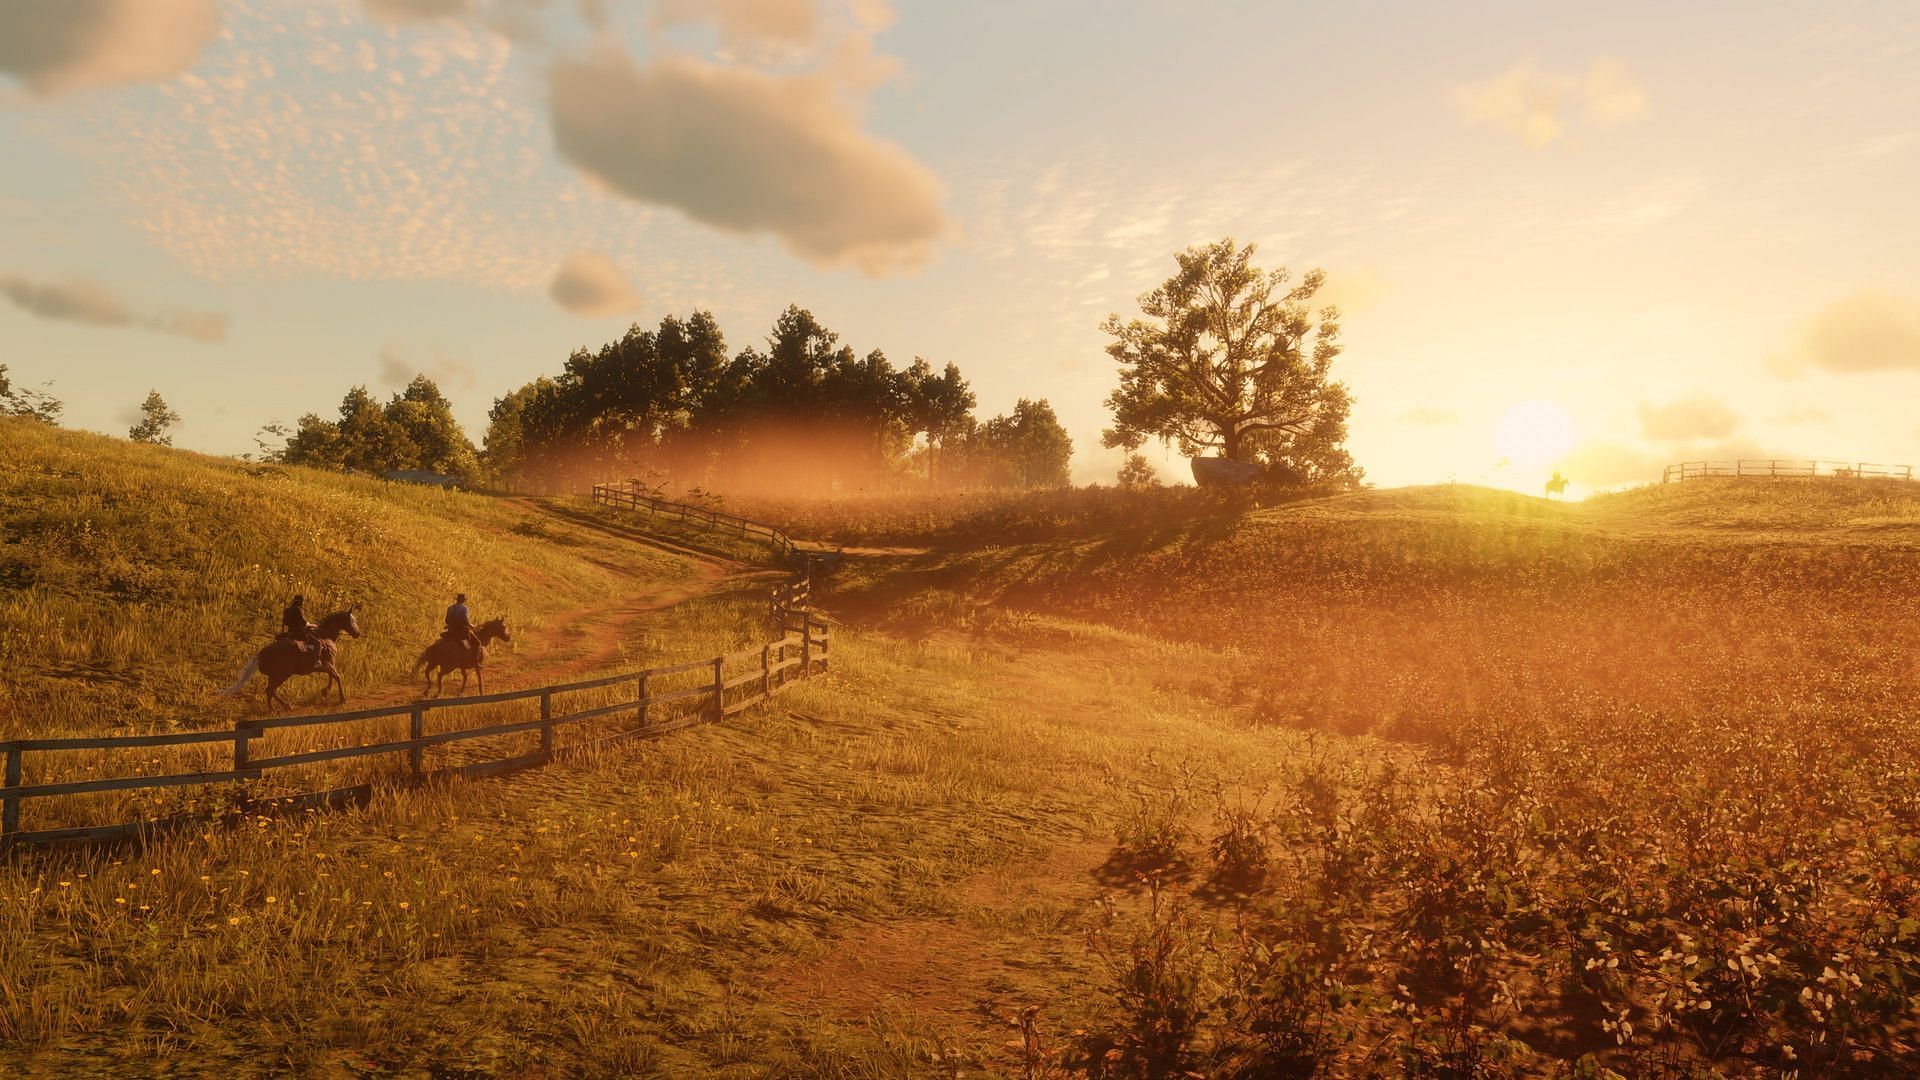 On the trail of Gold (Image via Rockstar Games)